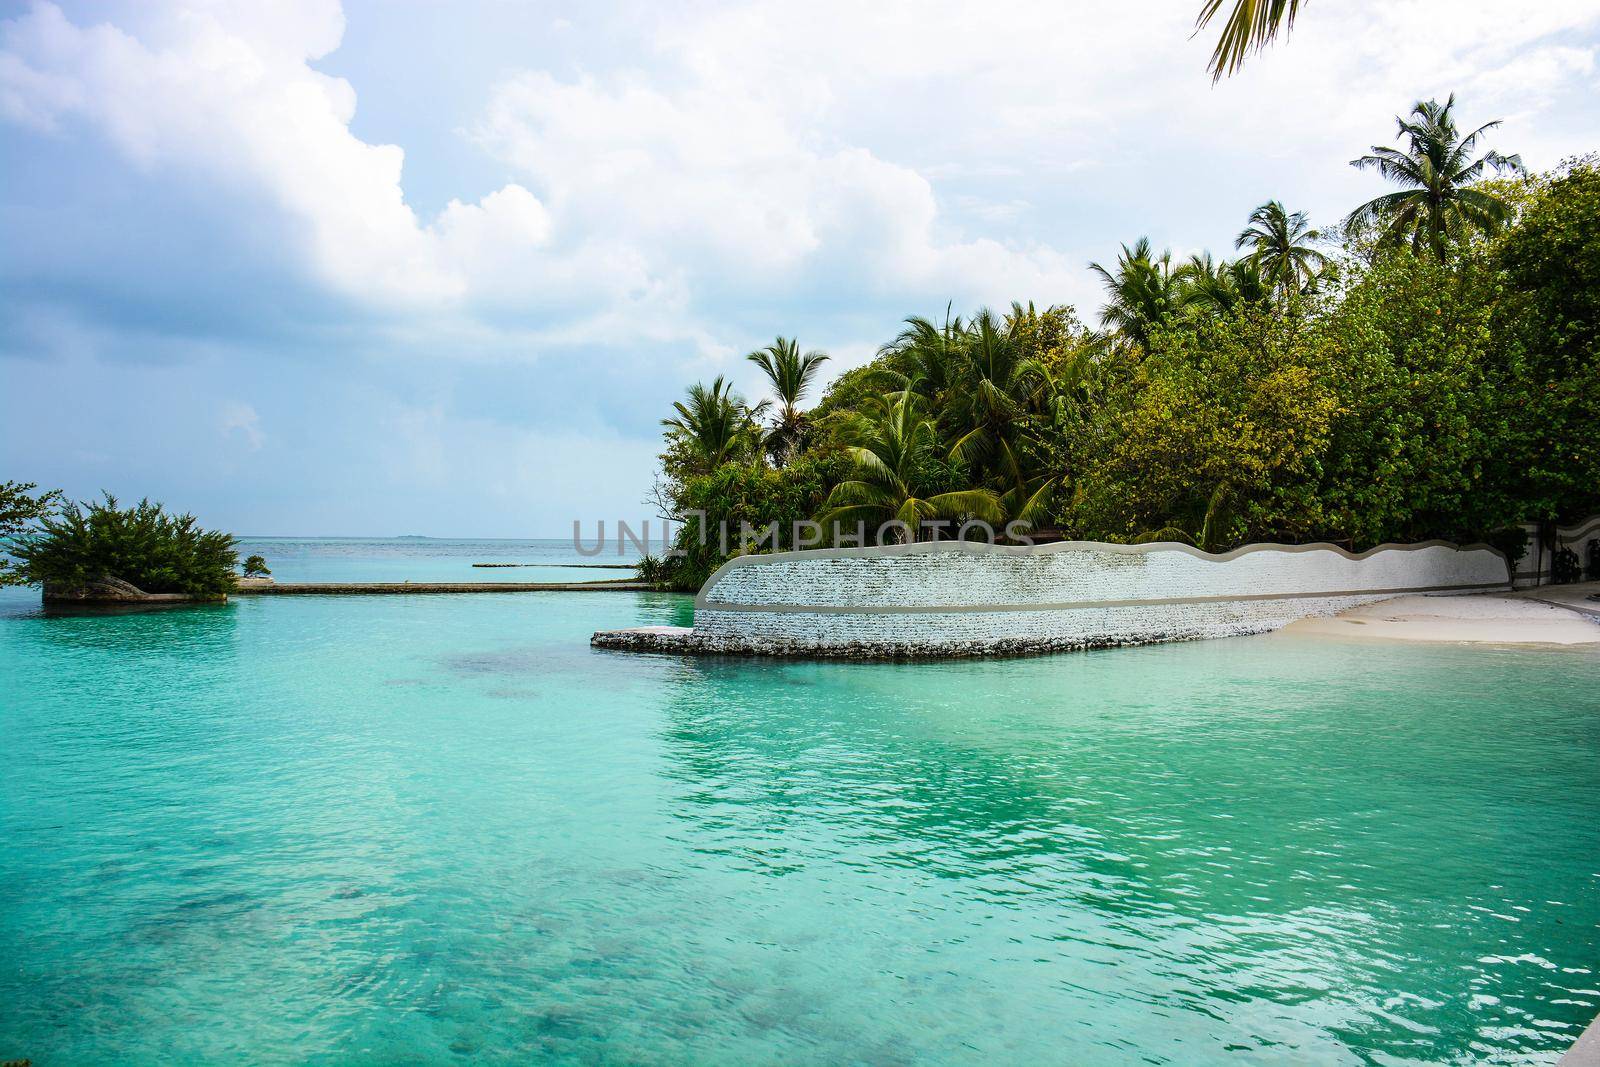 atoll of the tropics and maldives that are reflected in a sea of emerald with a cobalt blue sky